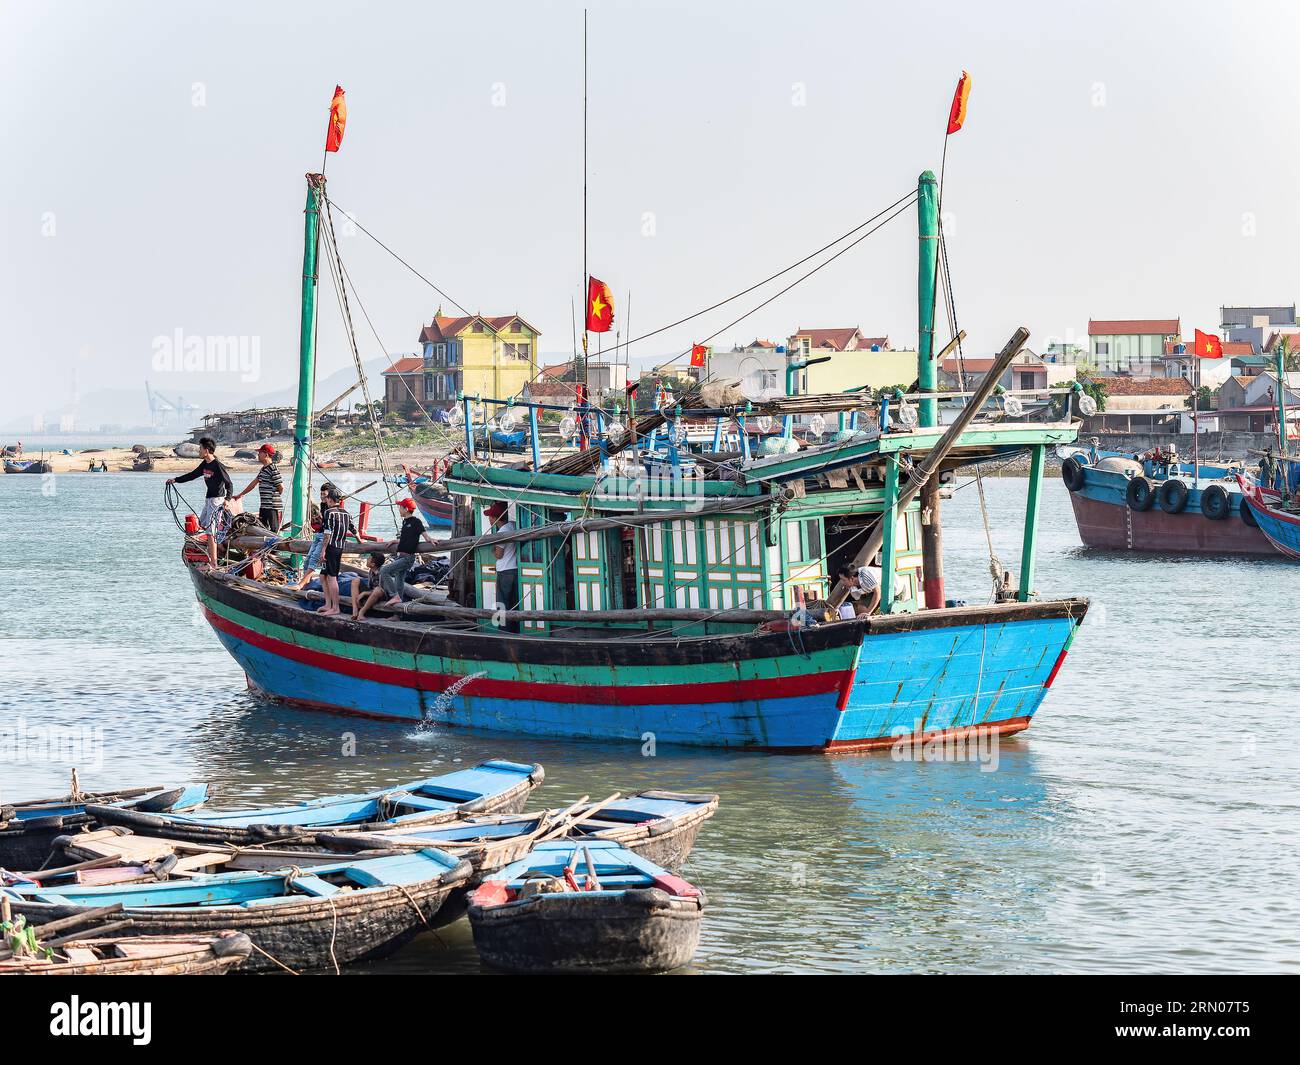 Young men onboard a fishing boat in Hai Thanh, a village in the Thanh Hoa province of Vietnam. Stock Photo